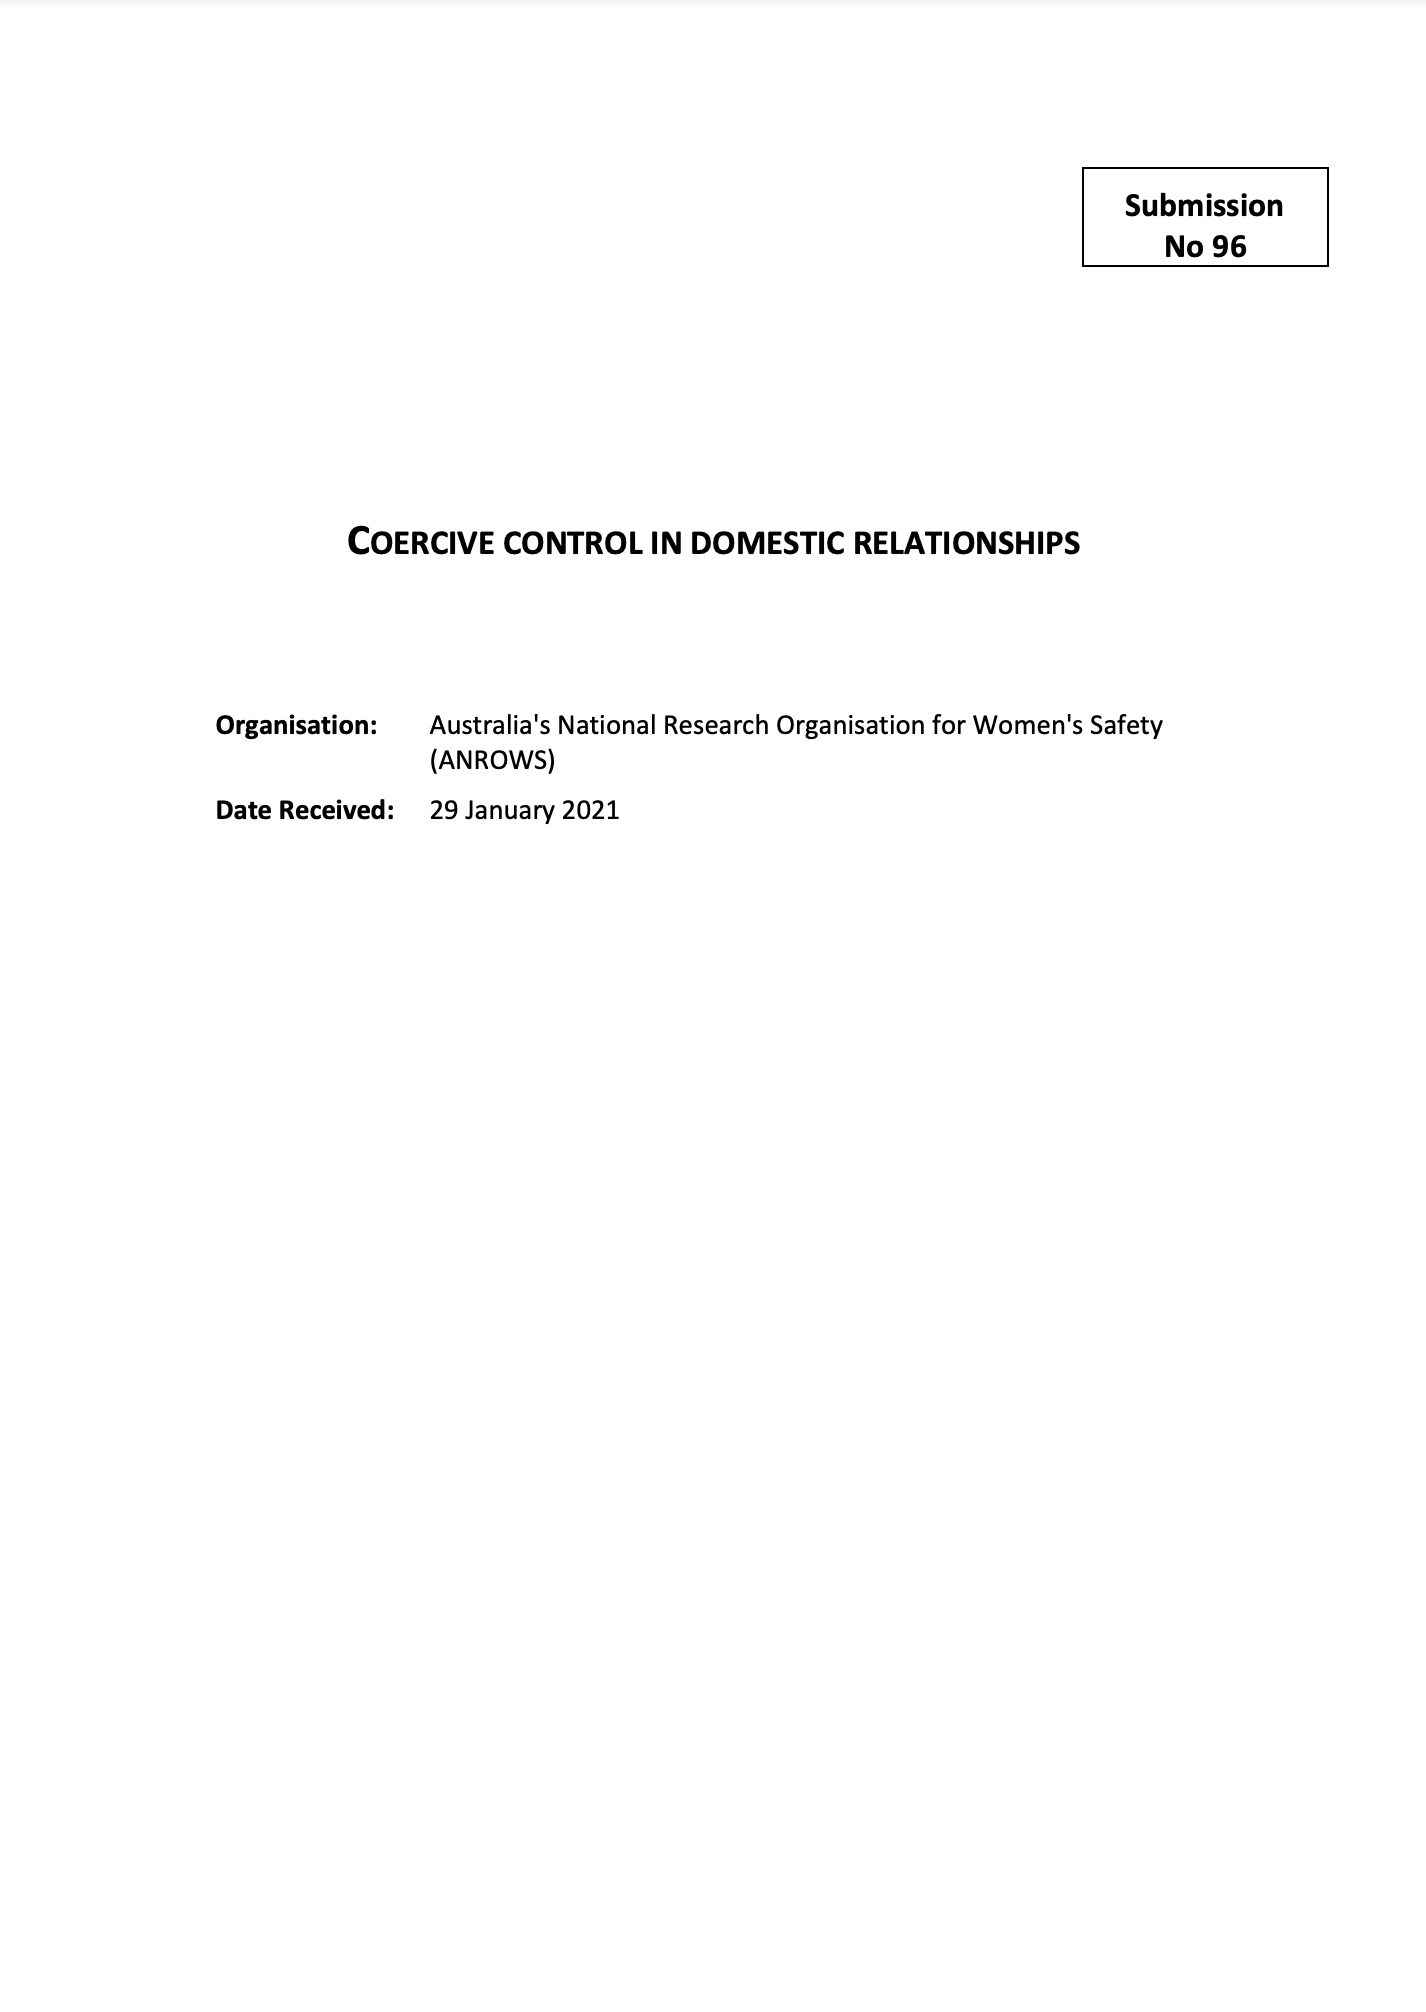 Cover image of Coercive control discussion paper submission